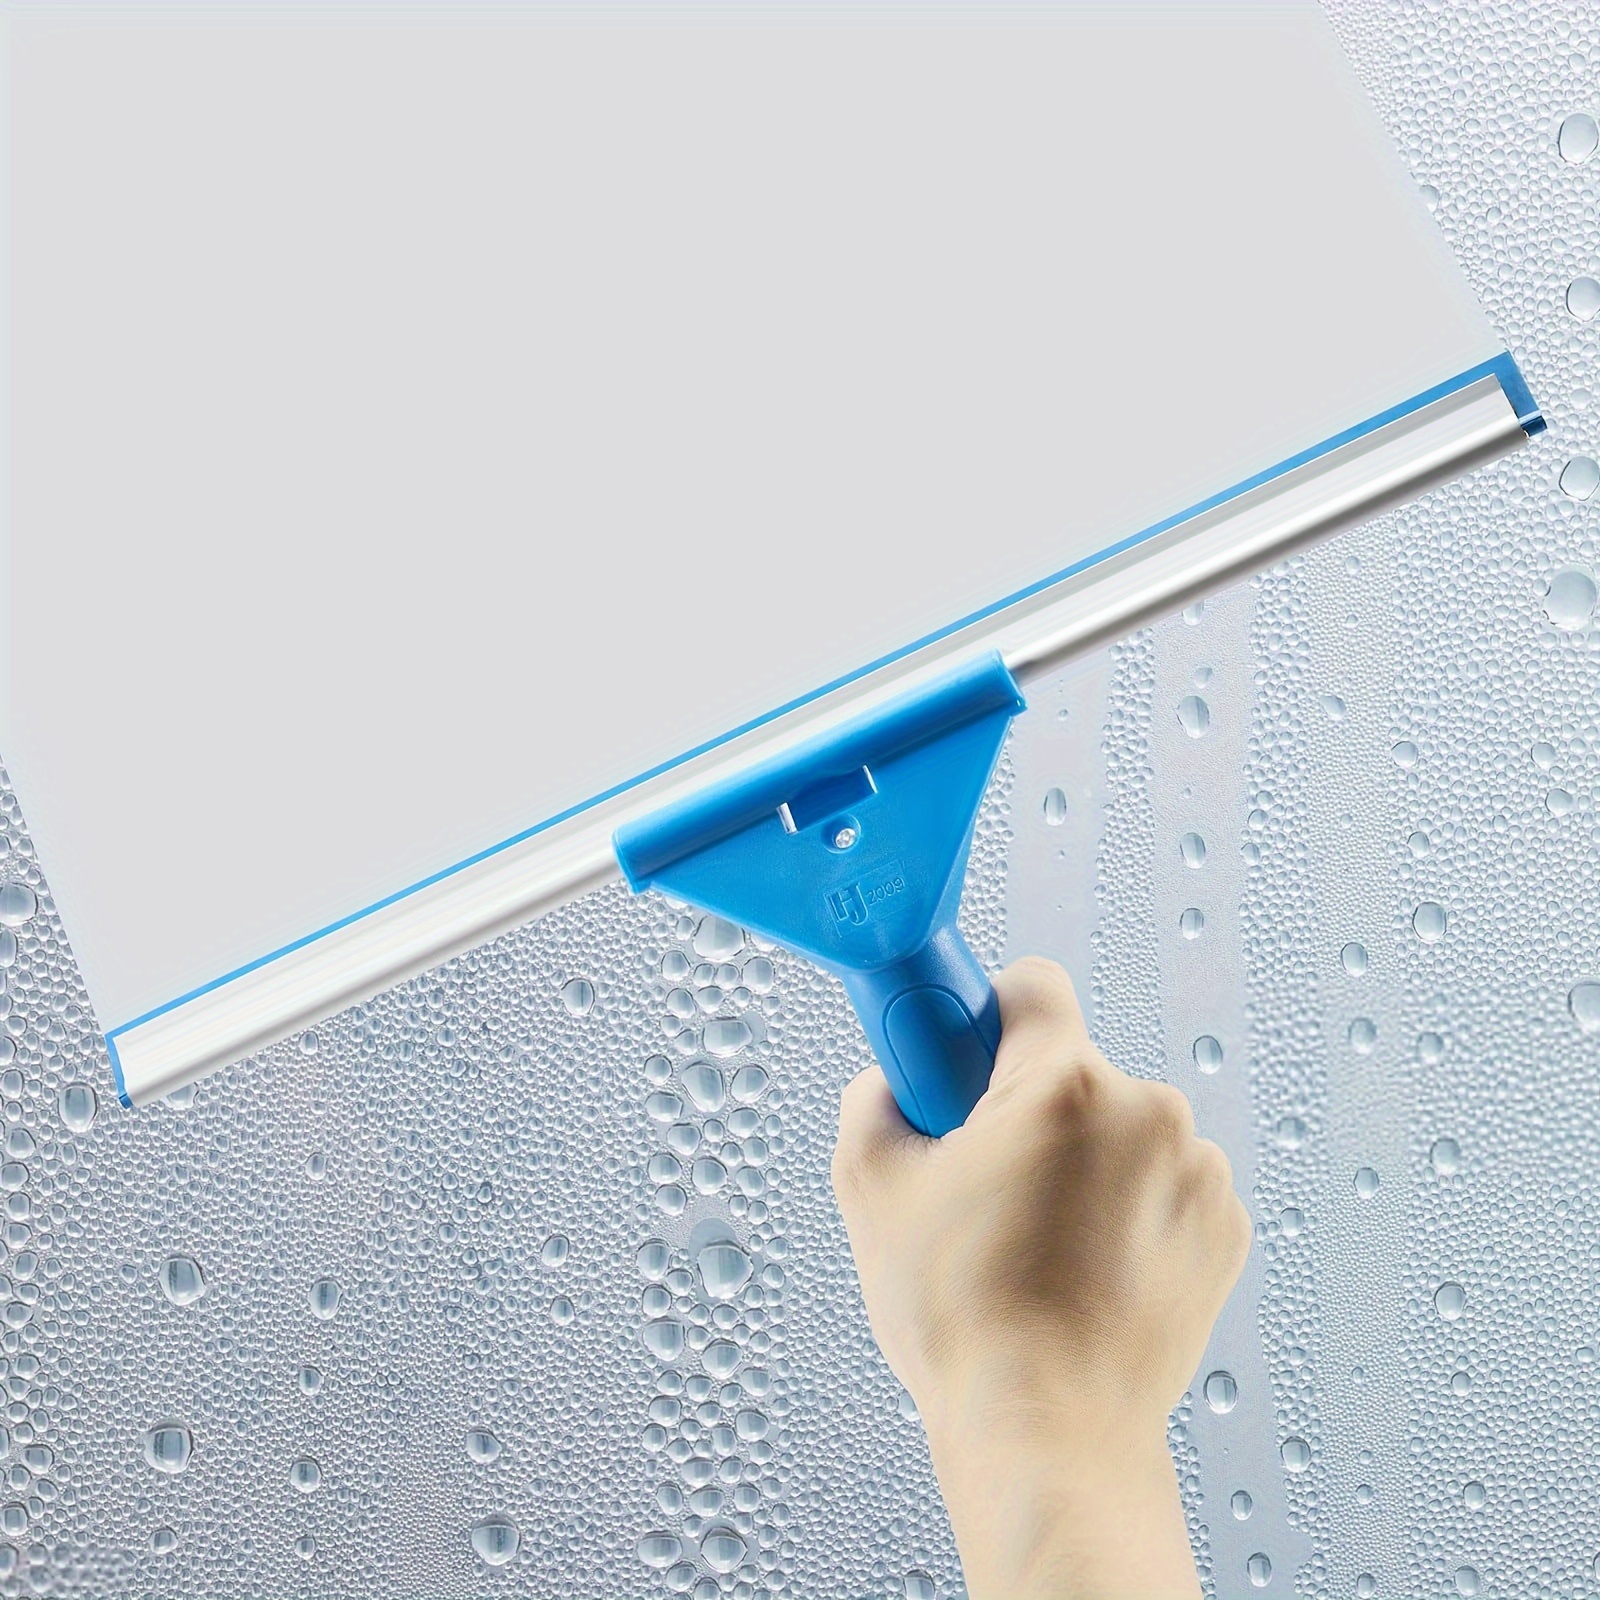 

Professional Window Cleaning Combo - Squeegee And Ultra-fine Fiber Window Washer, 10 Inches, Versatile Professional Window Cleaning Kit Glass Scraper, For Windows, Cars, Bathrooms, And Showers.